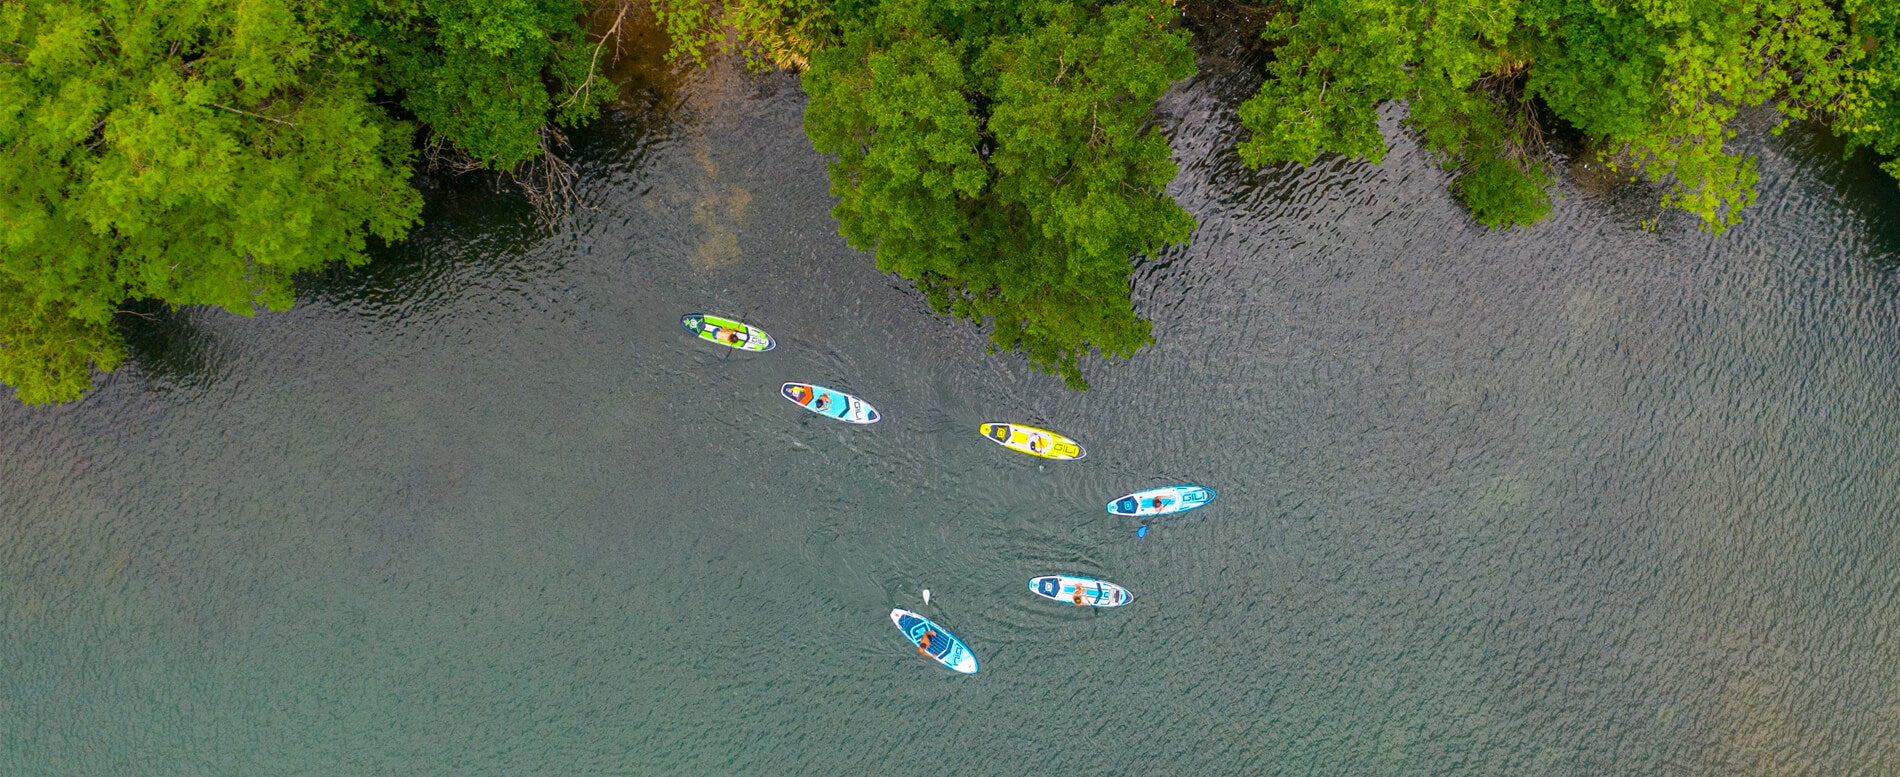 Paddle boarders on a river